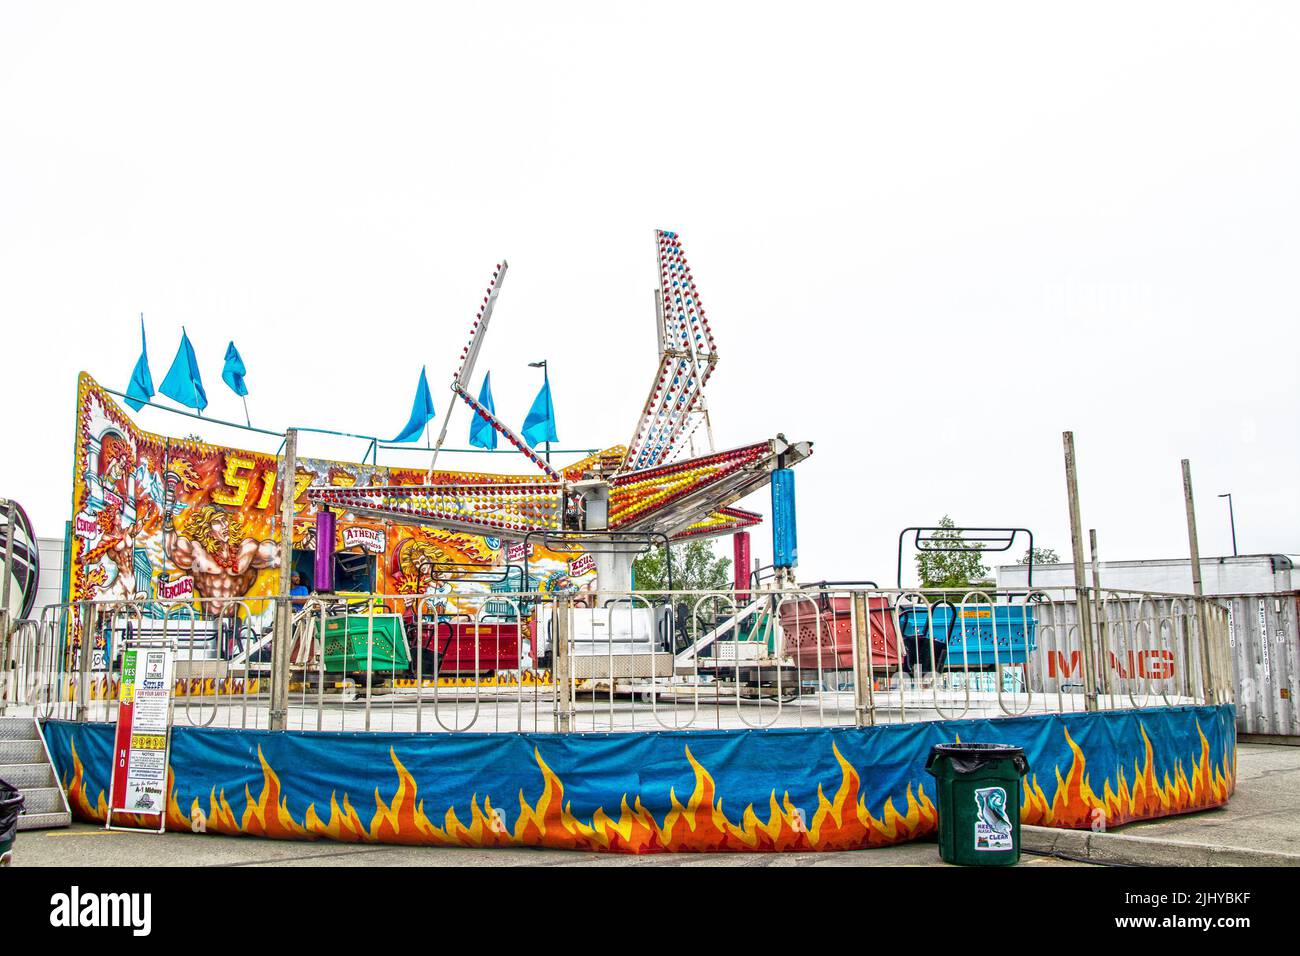 2022-06-25 Anchorage Alaska USA Carnival ride - Sizzler whiling seats in brightly colored ride with flags and neon lights and outdoor fun fair - Room Stock Photo